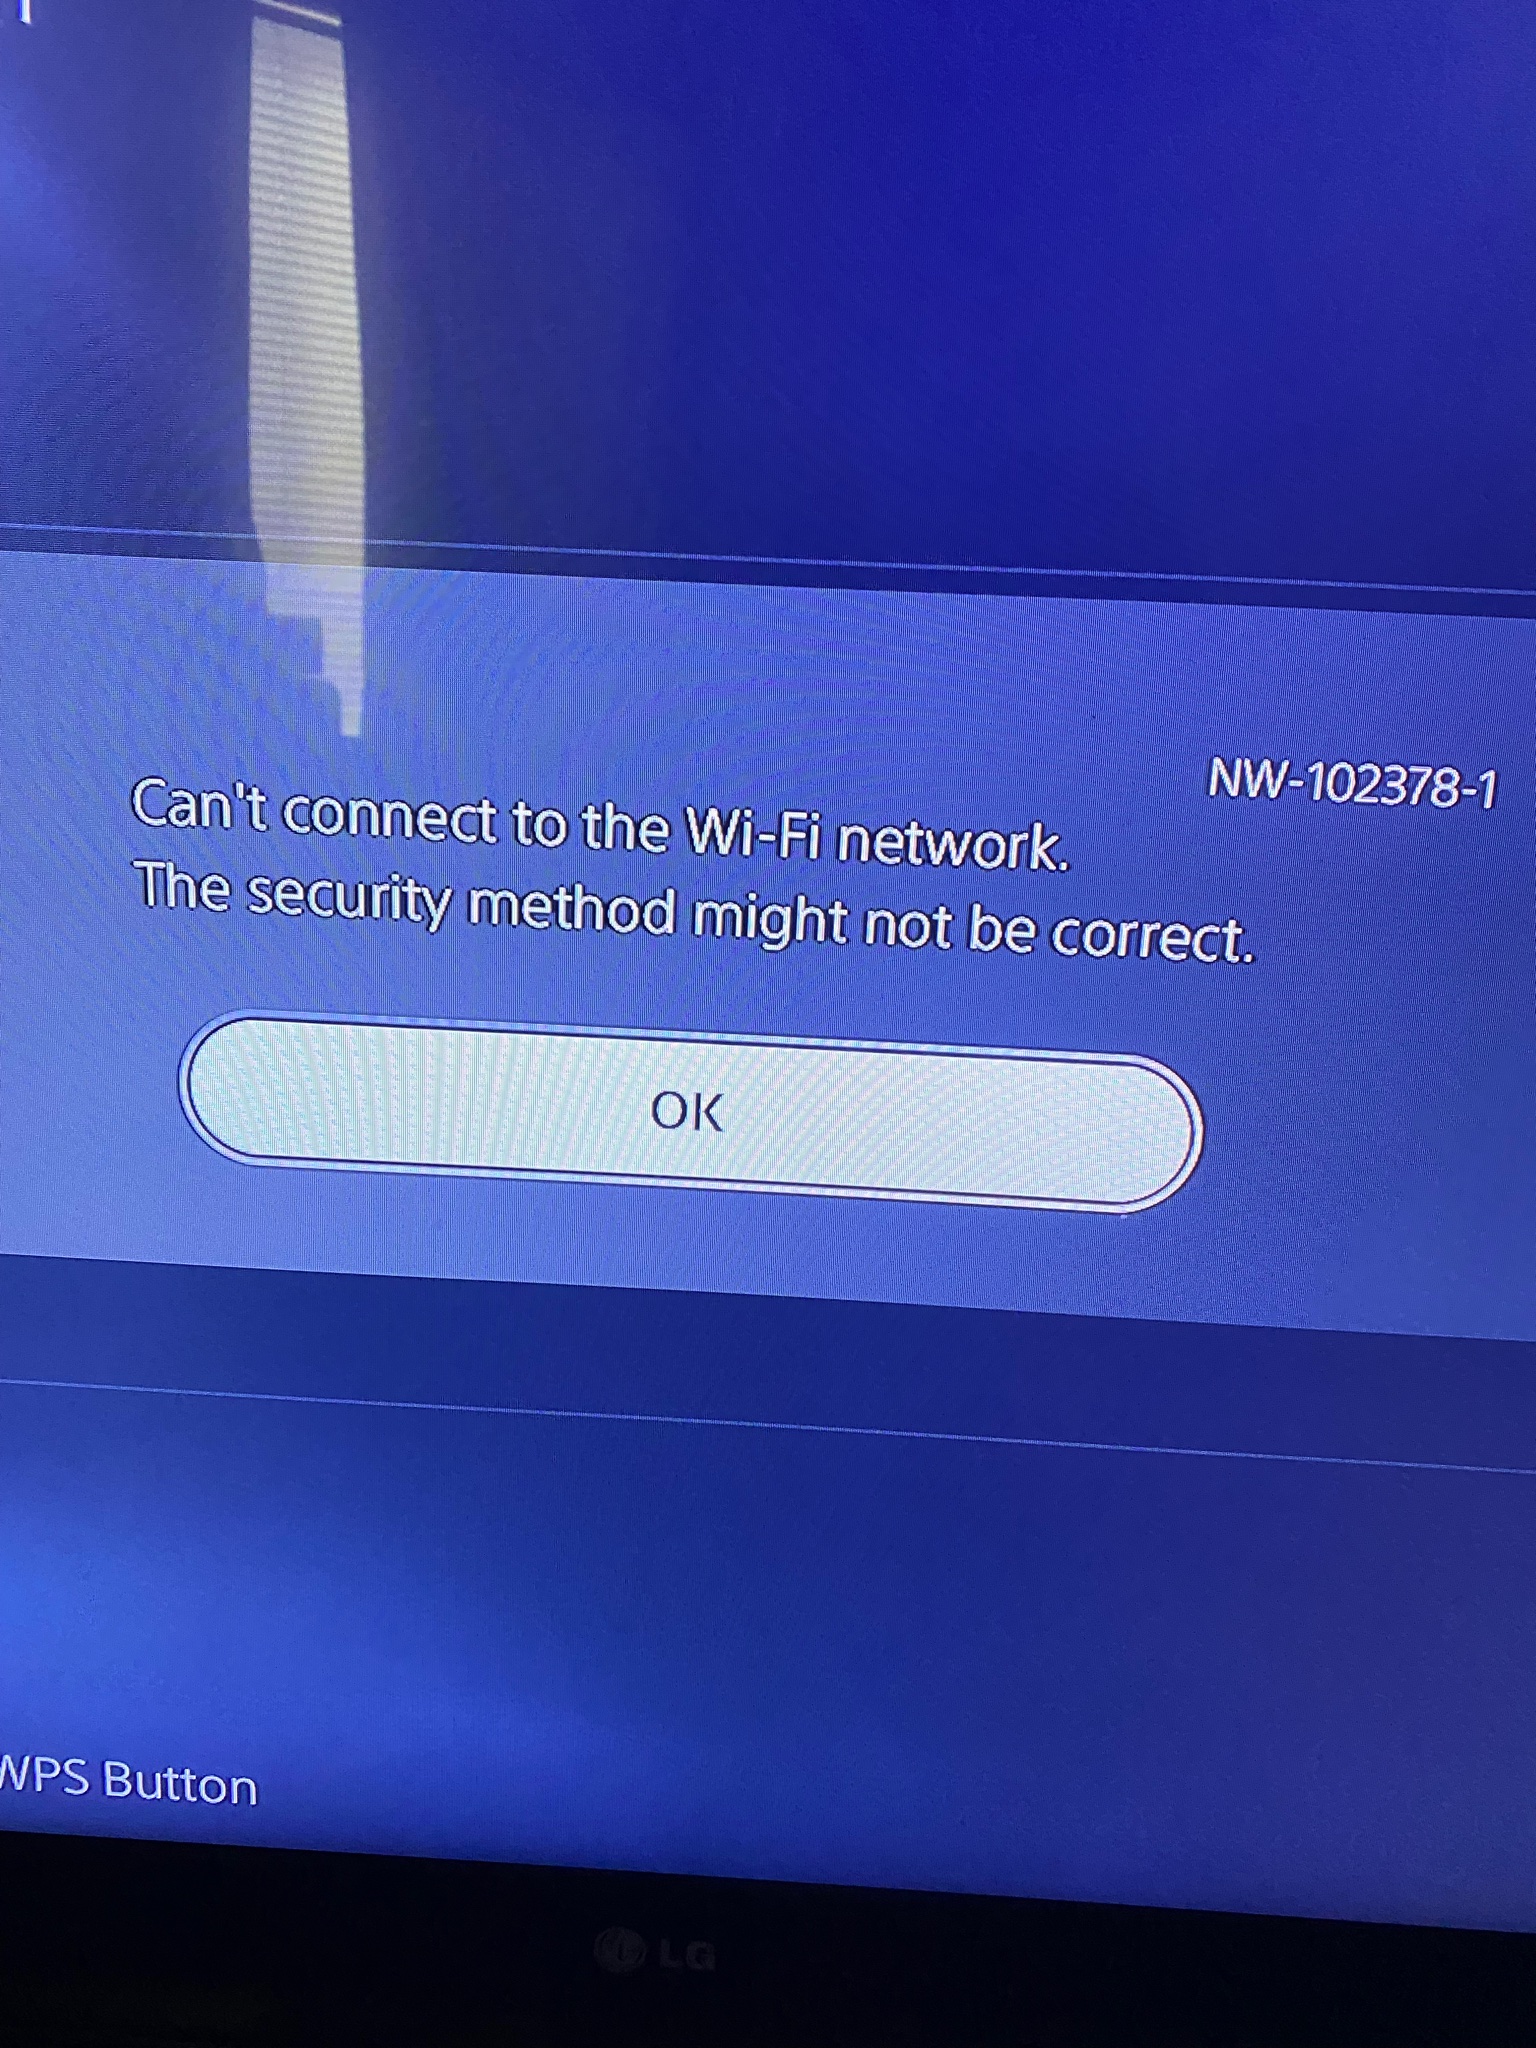 laura lopez on Twitter: "@AskPlayStation I did that in this keeps popping up. Internet is working on my PS4 and everything else but not on PS5 https://t.co/VRfRZlZPse" /